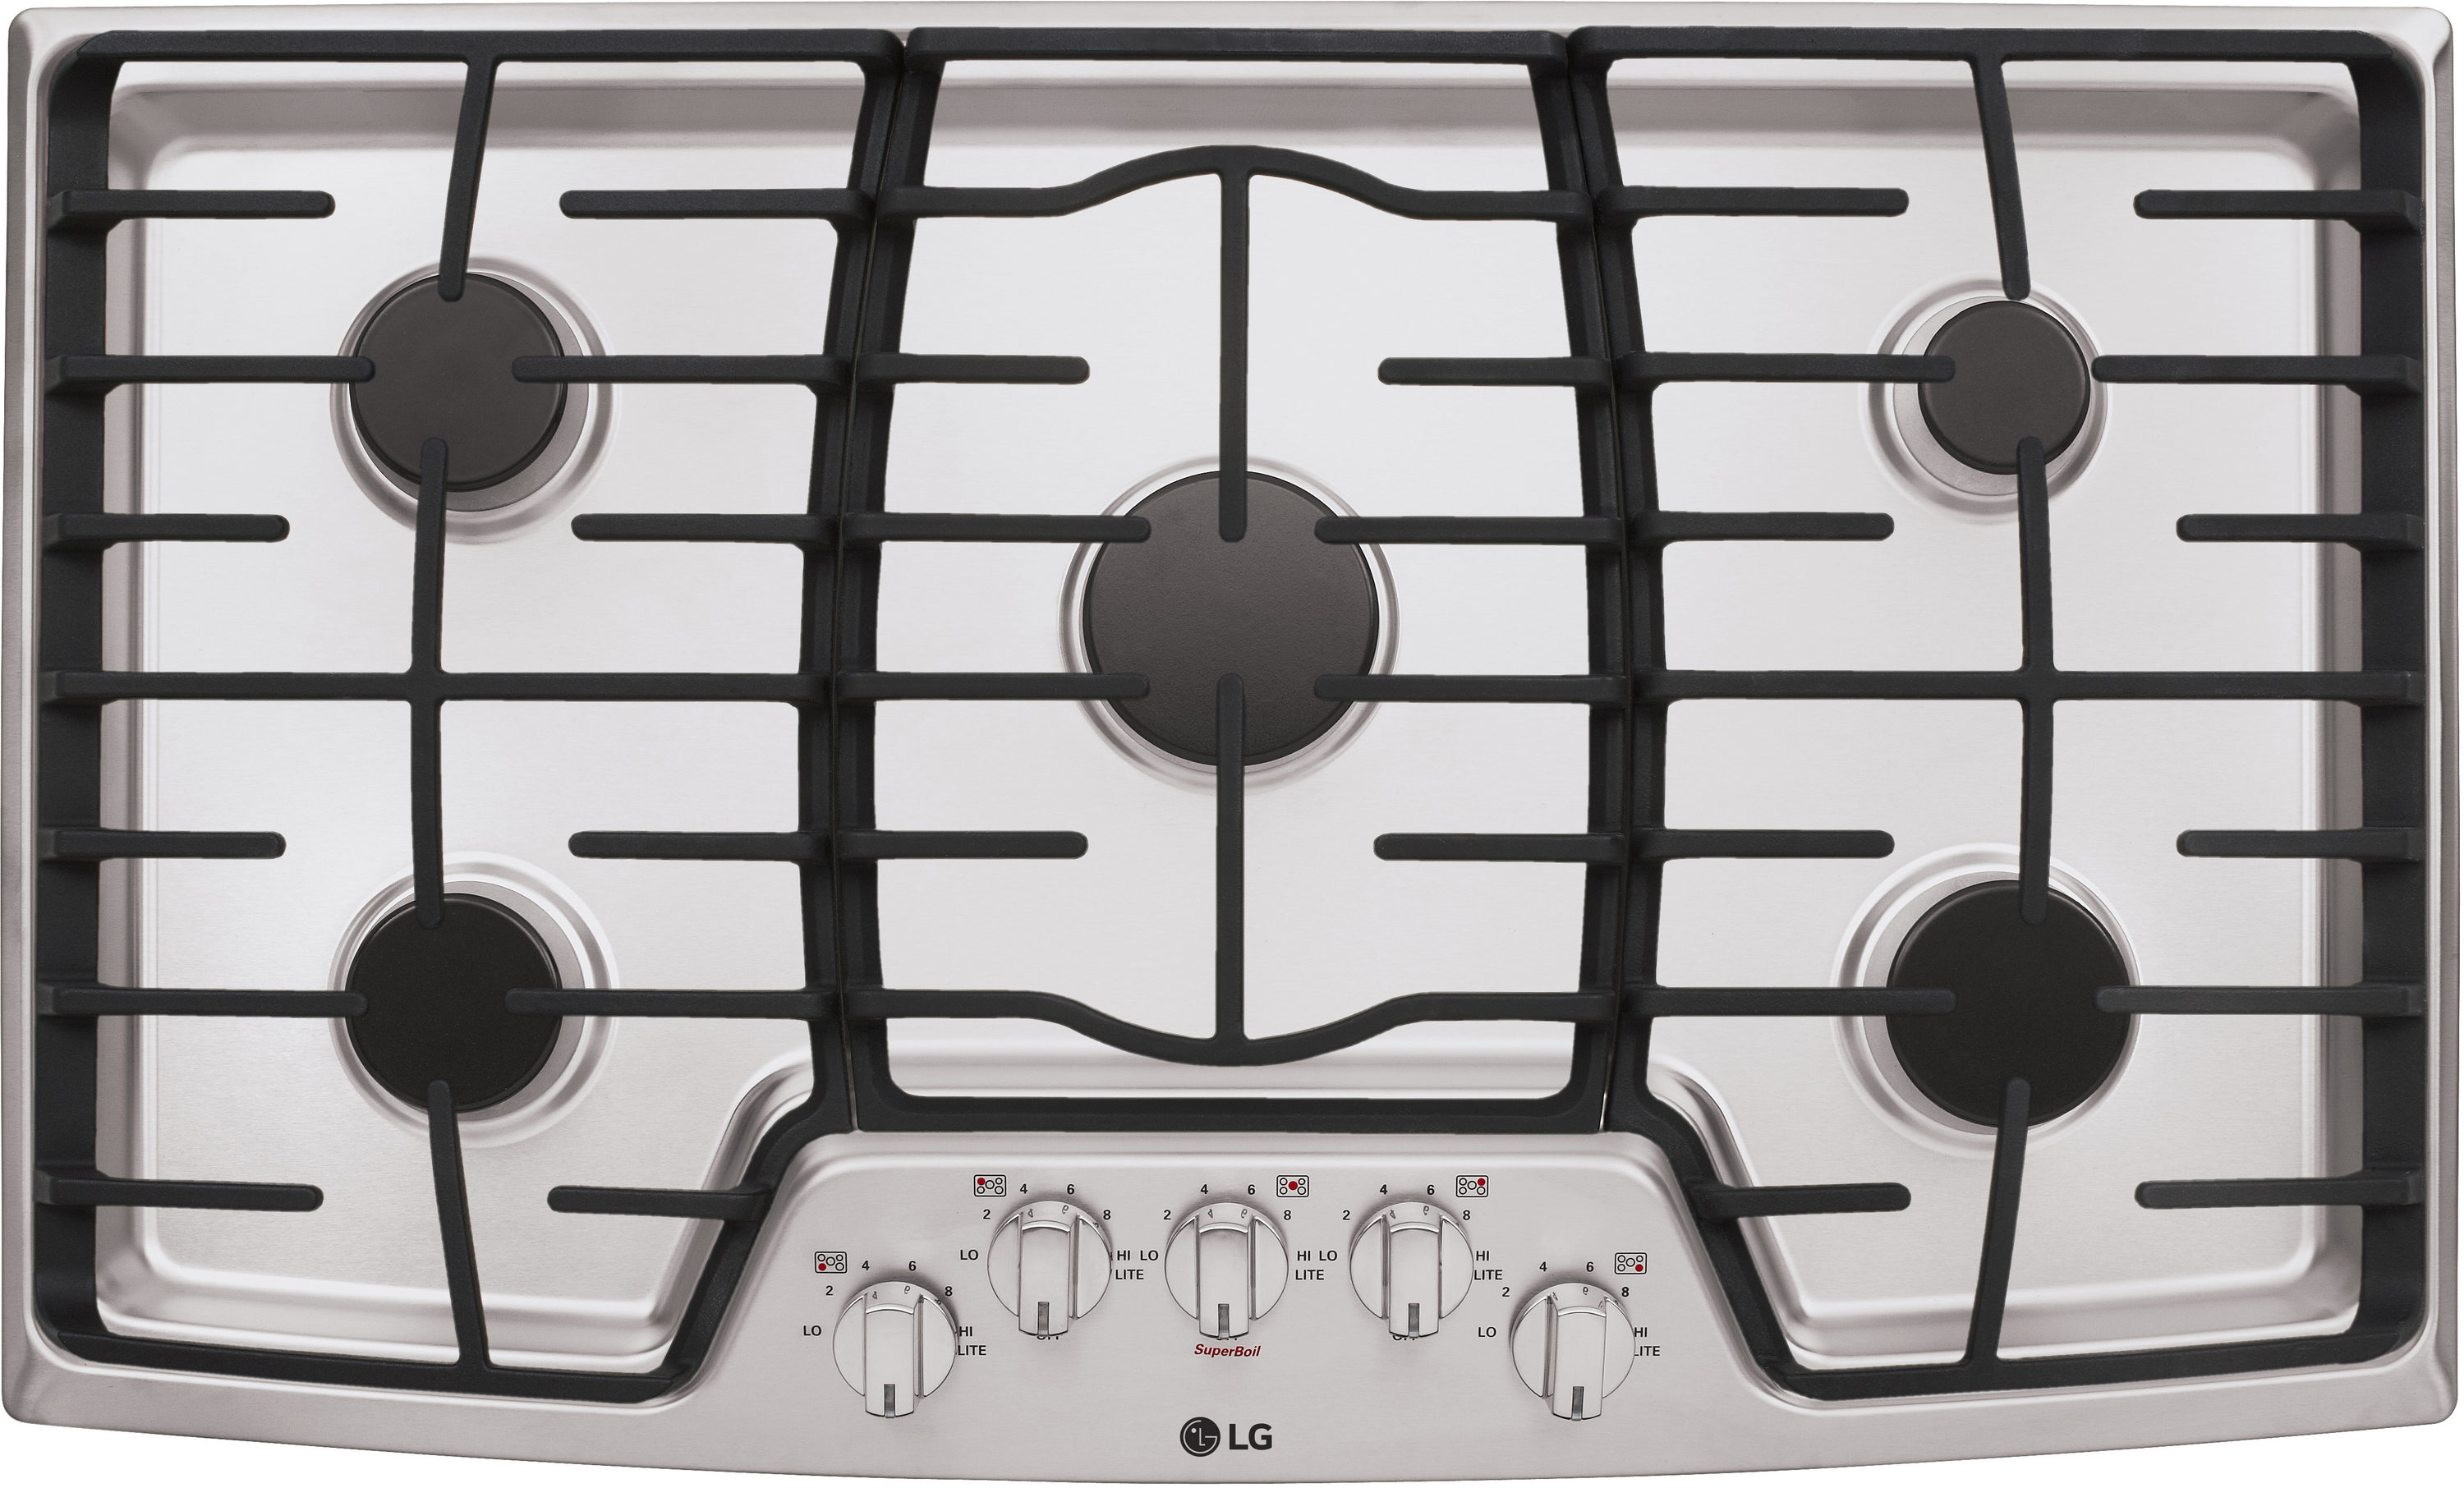 LG 36 Stainless Steel Smart GAS Cooktop with Easyclean & ThinQ